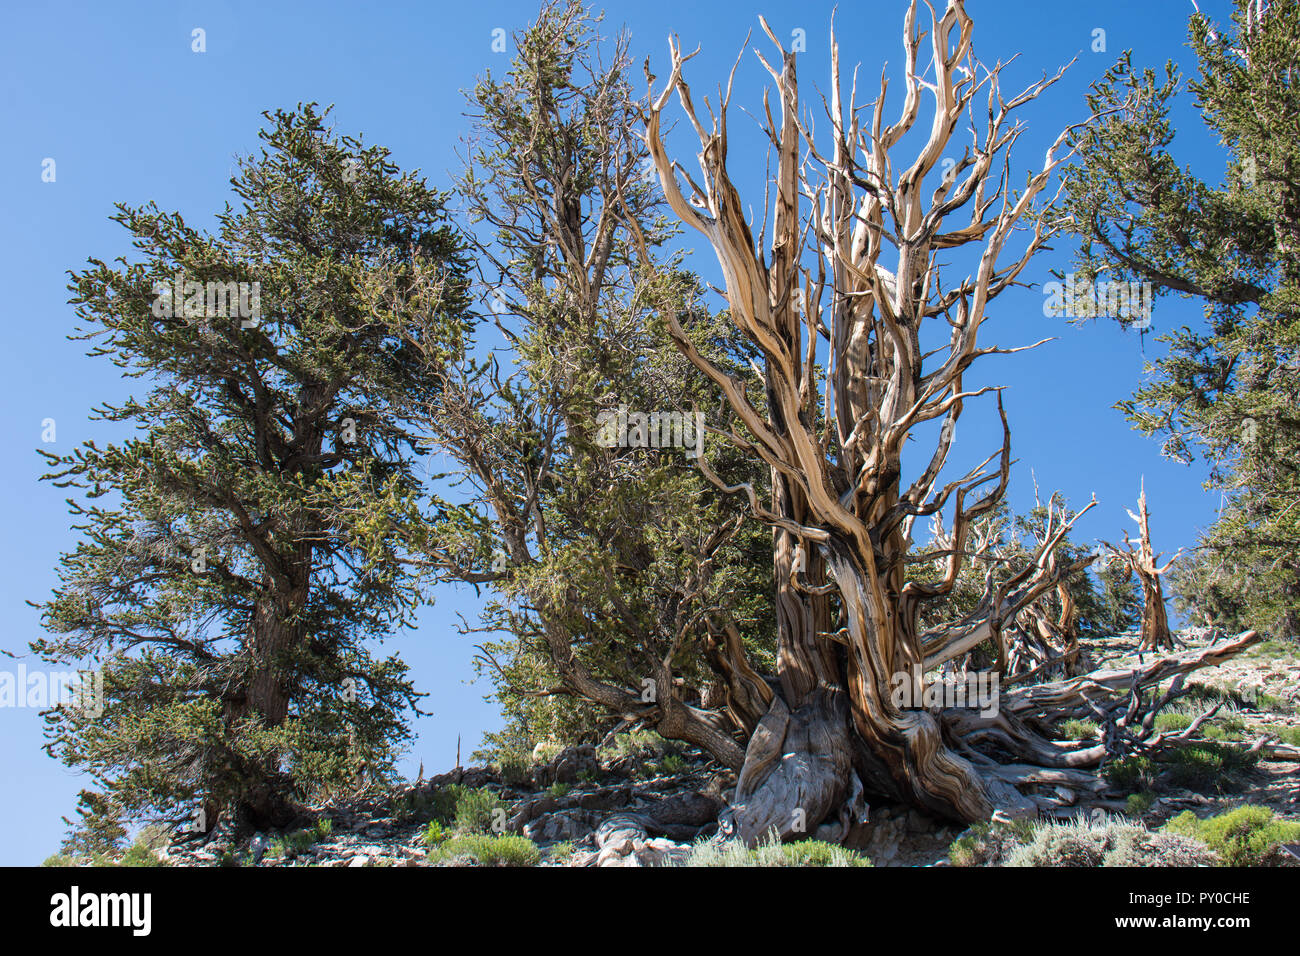 Ancient Bristlecone Pine Tree - these old trees have twisted and gnarled features. California - White Mountains Stock Photo